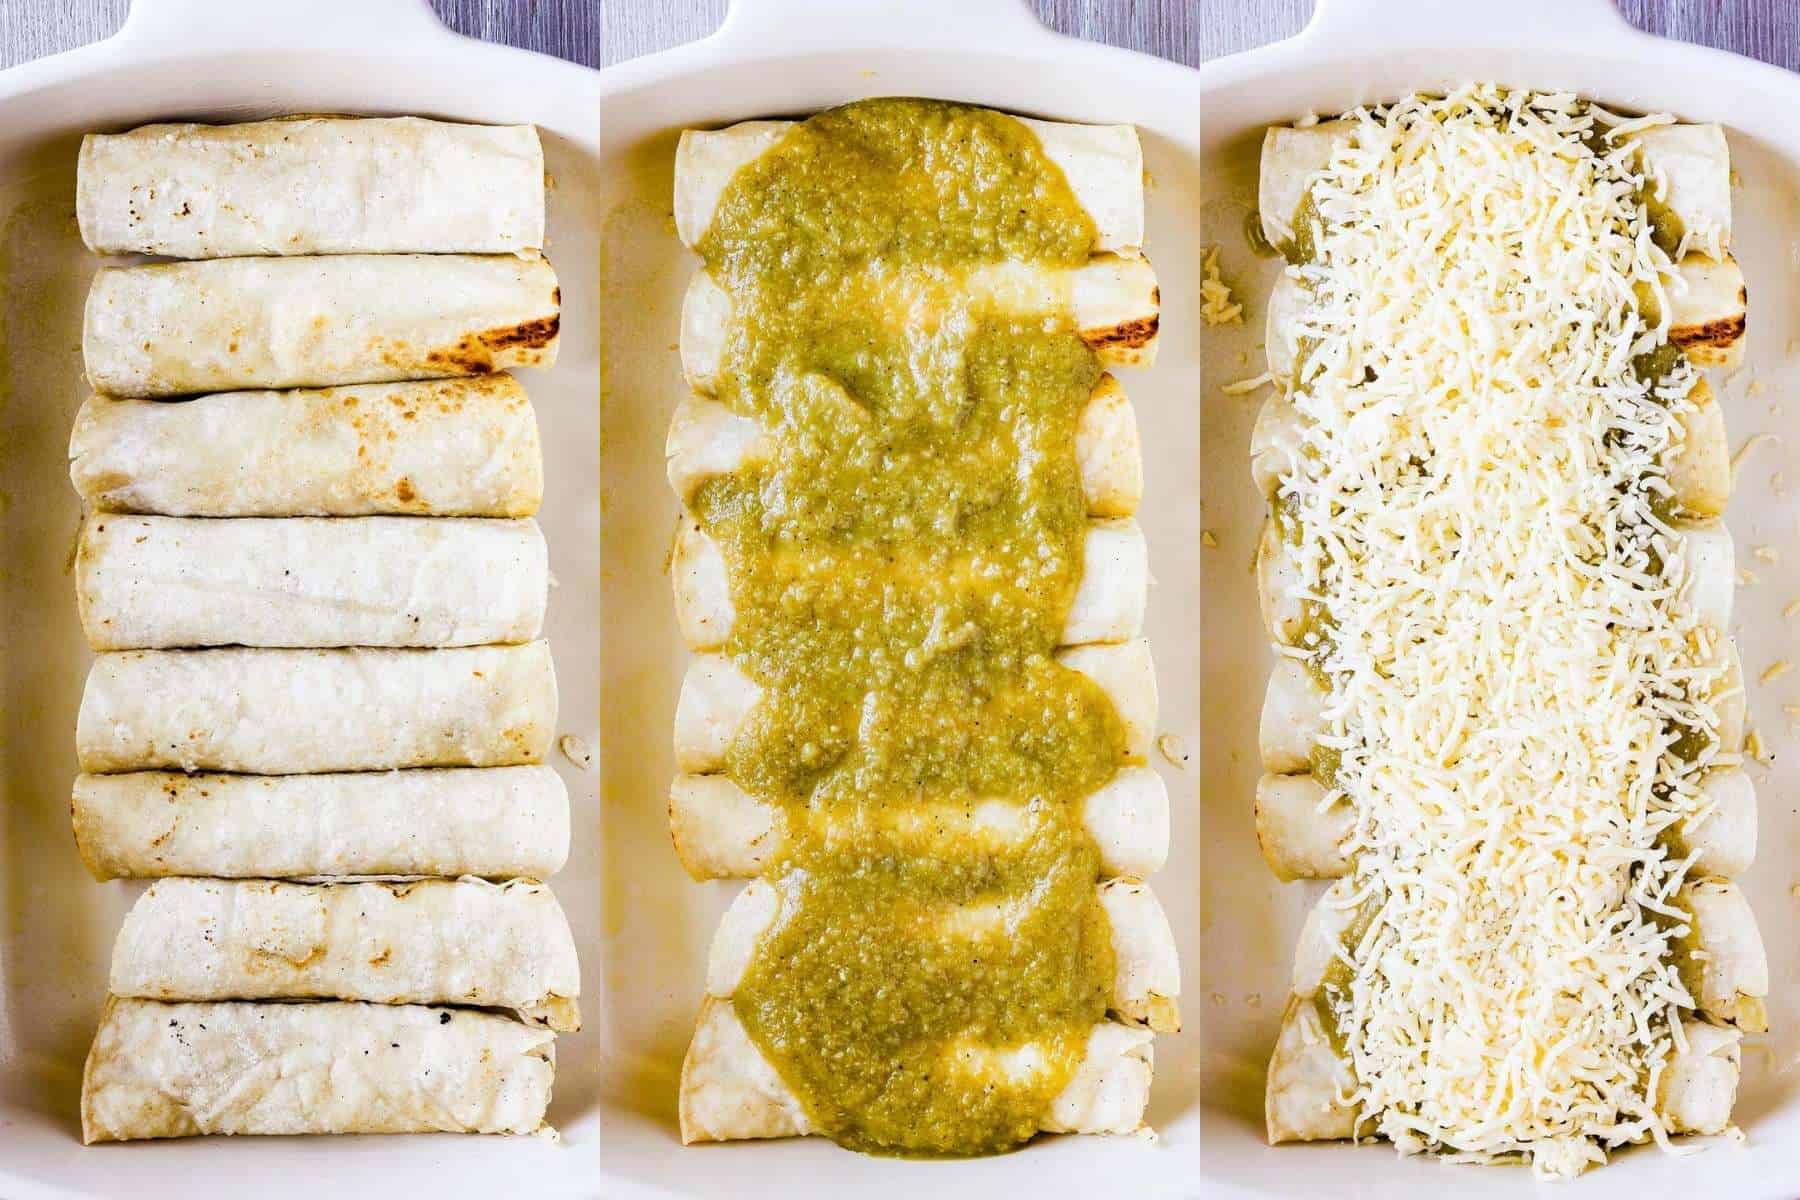 Three stages of enchilada assembly.